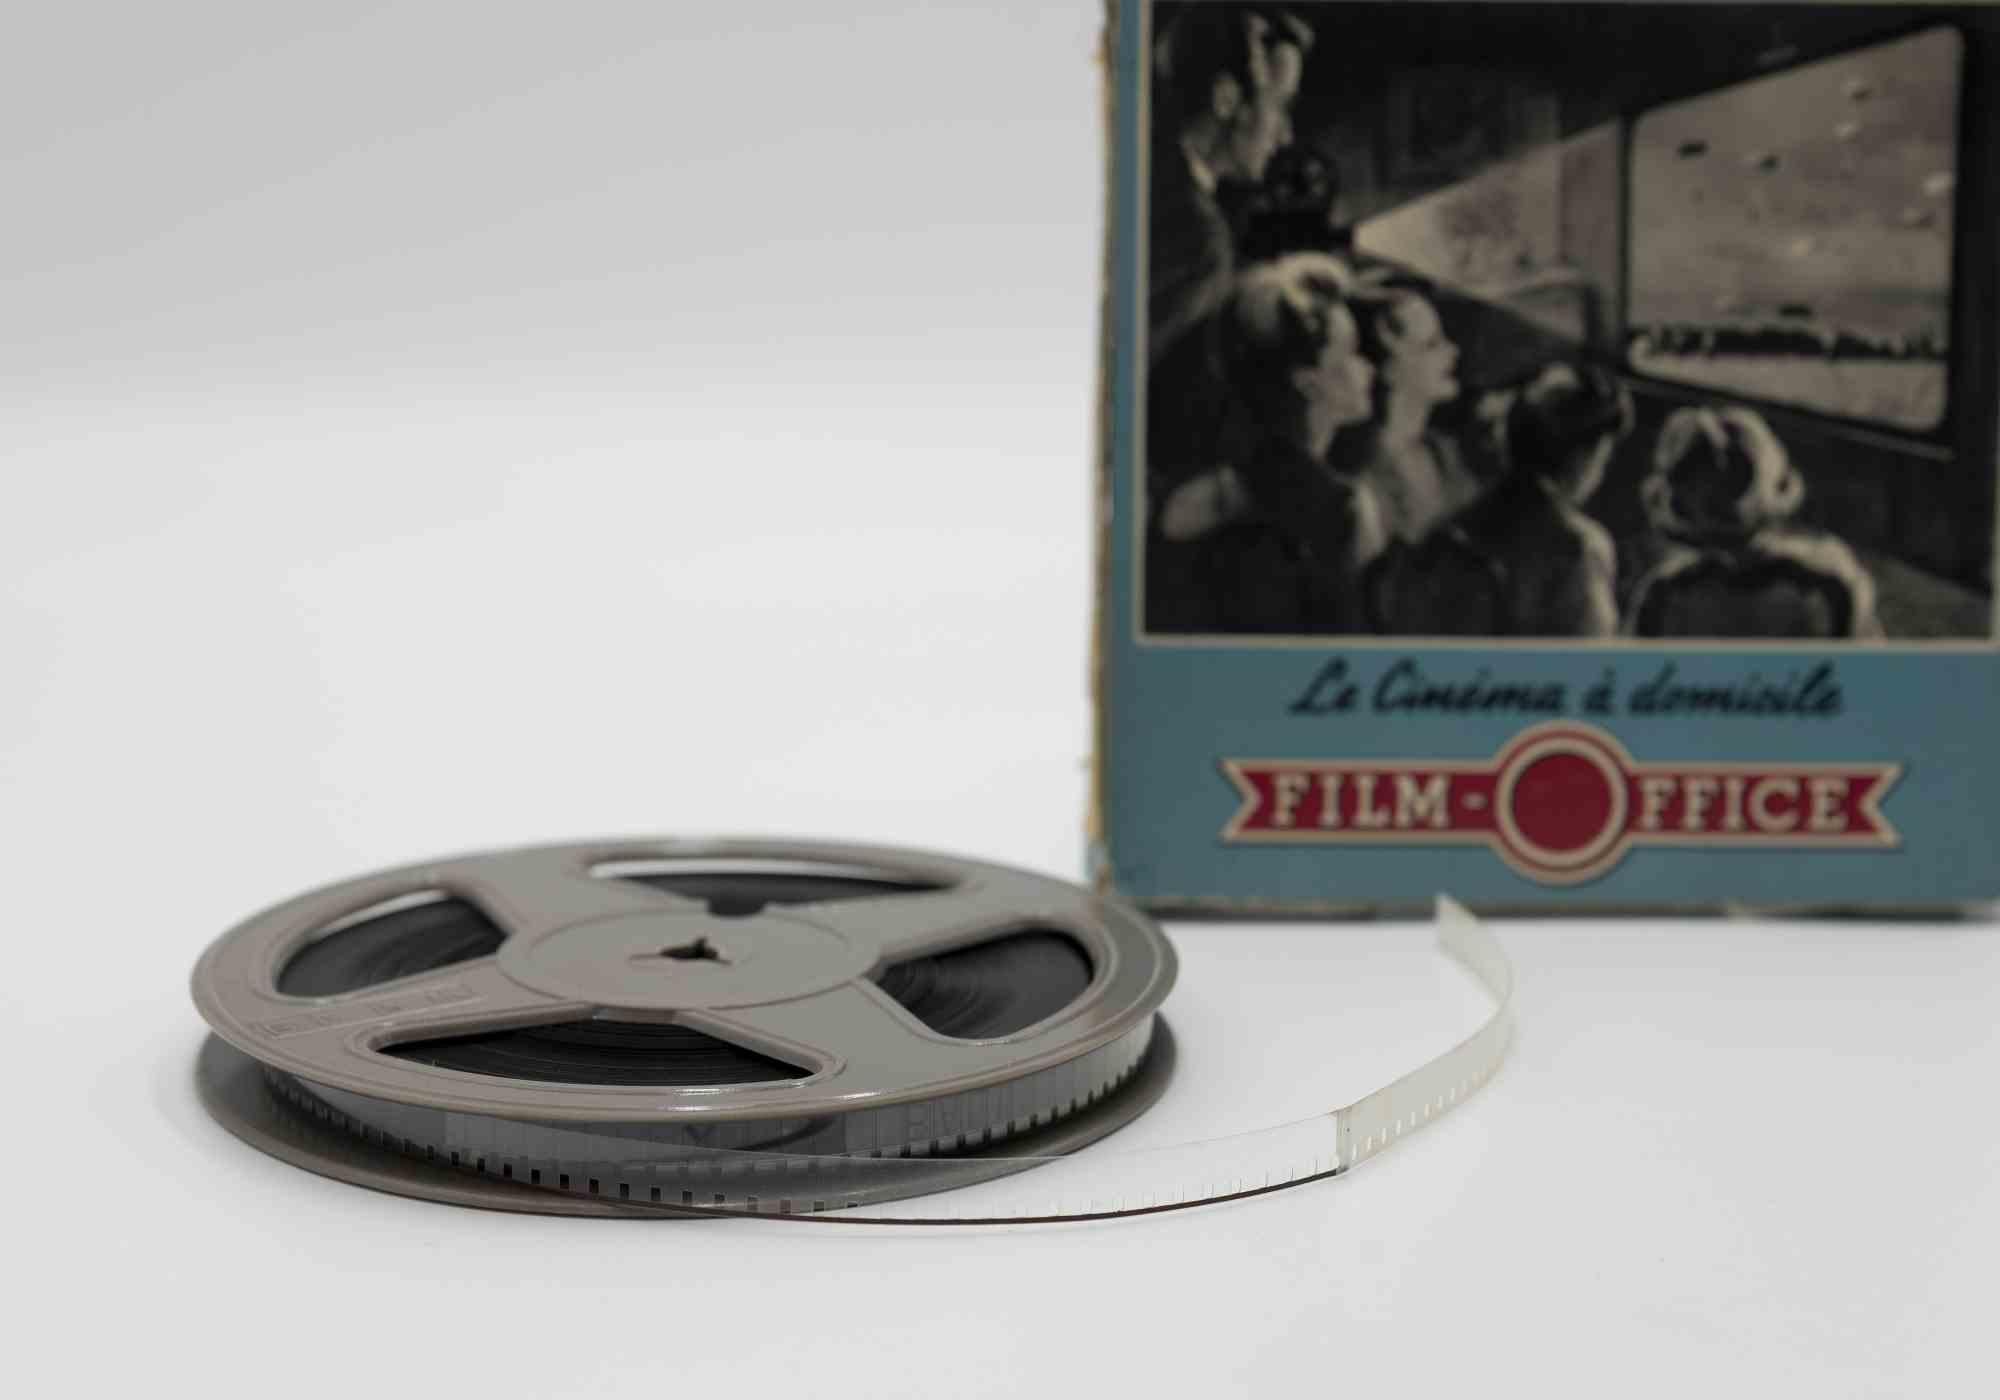 Le Cinèma à domicile, Film Office  is an original film from the 1960s.

It includes original packaging.

16 mm.

Good conditions. 